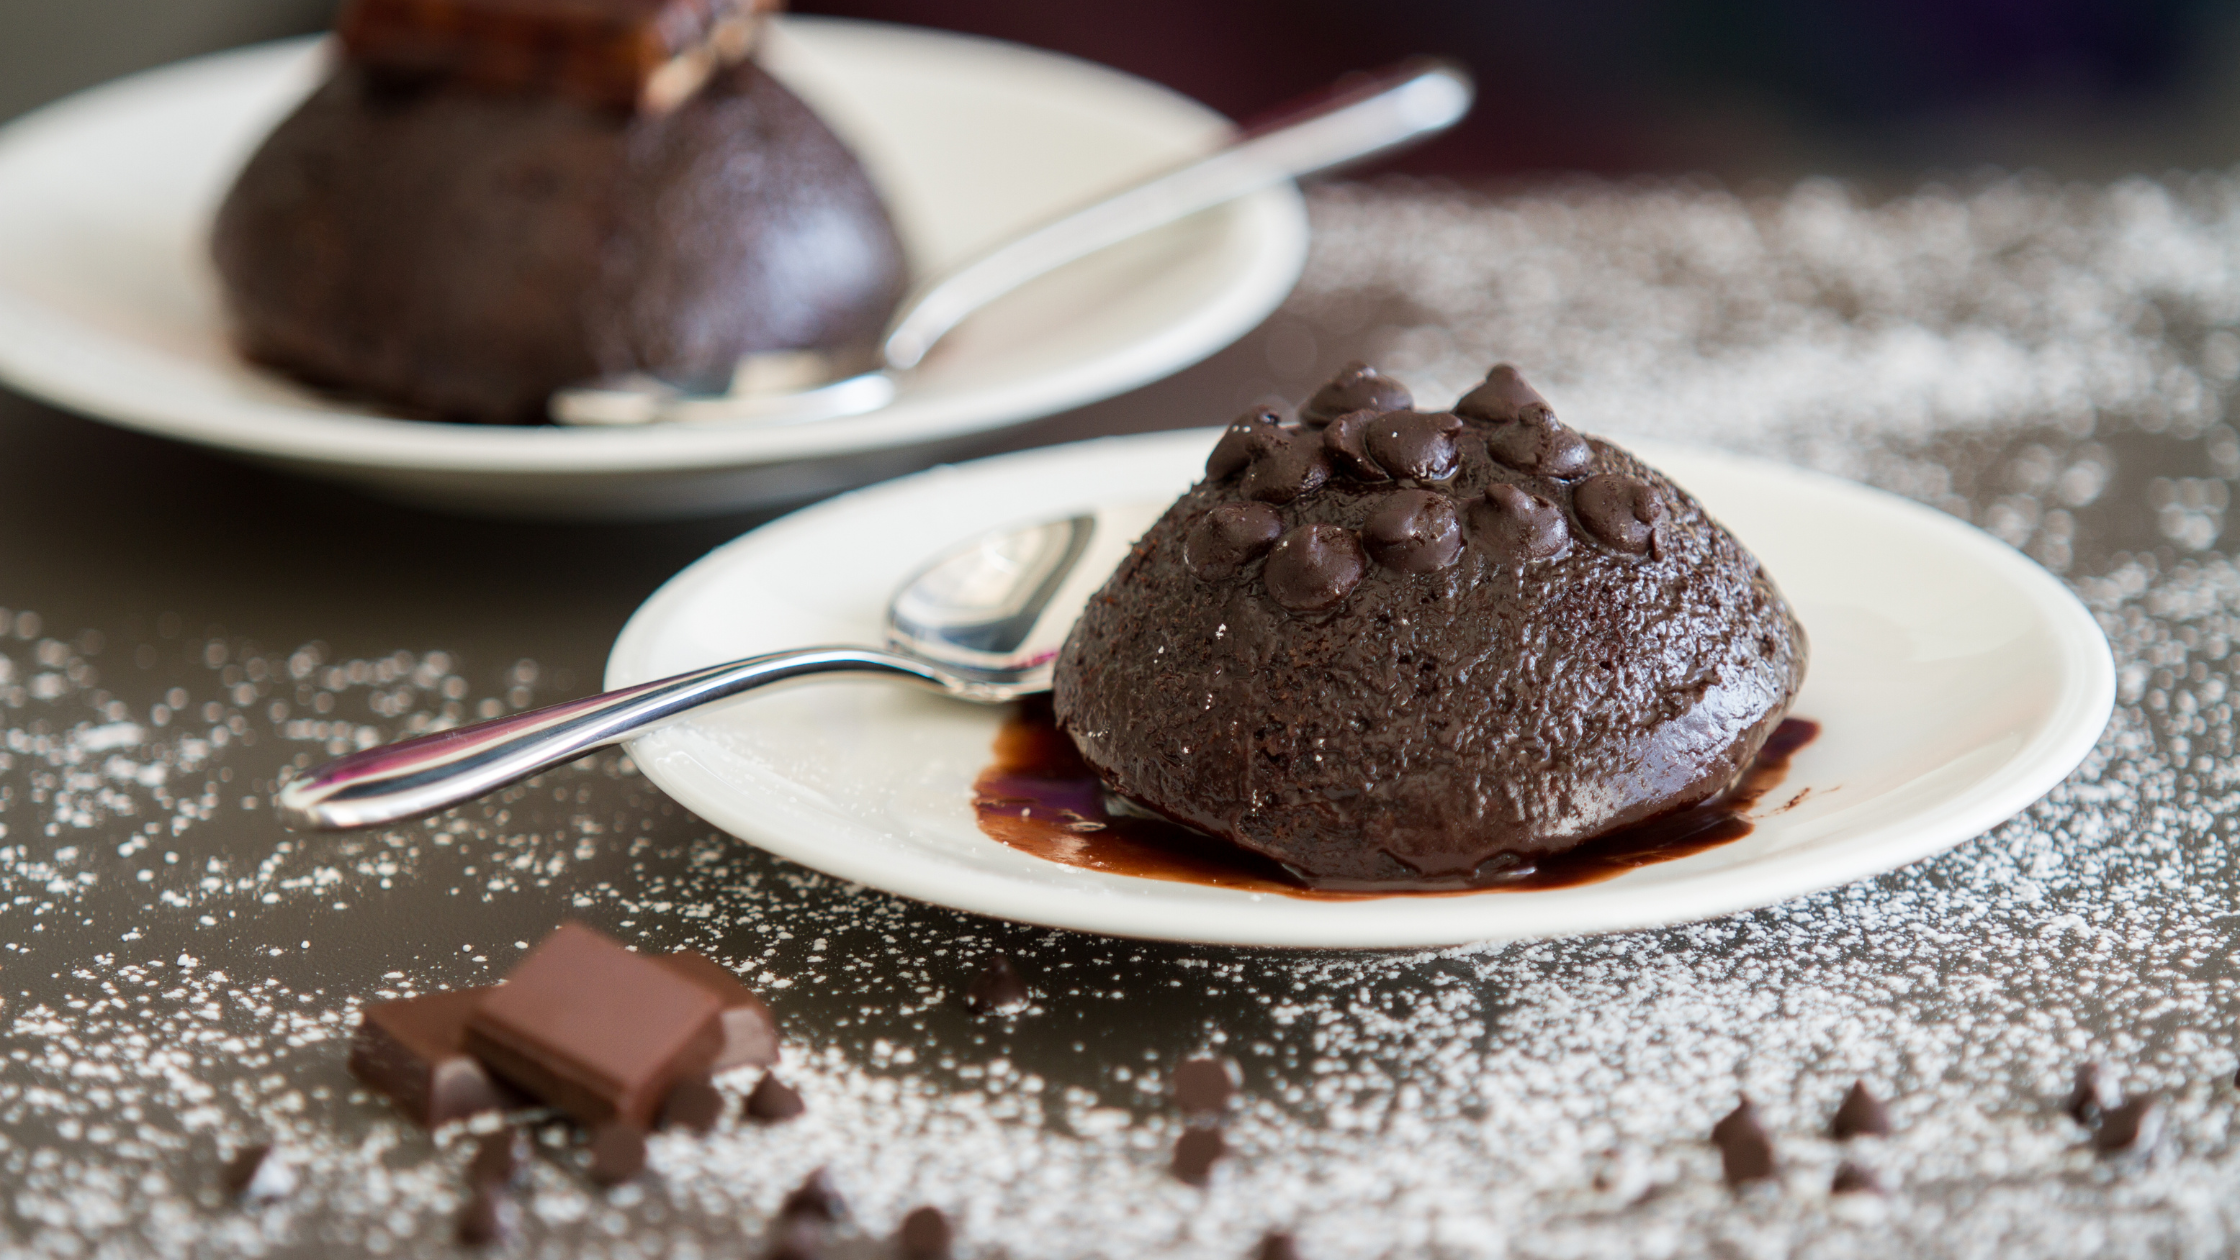 The Perfect Eggless Chocolate Lava Cake Recipe - Easy To Make And Deliciously Decadent!